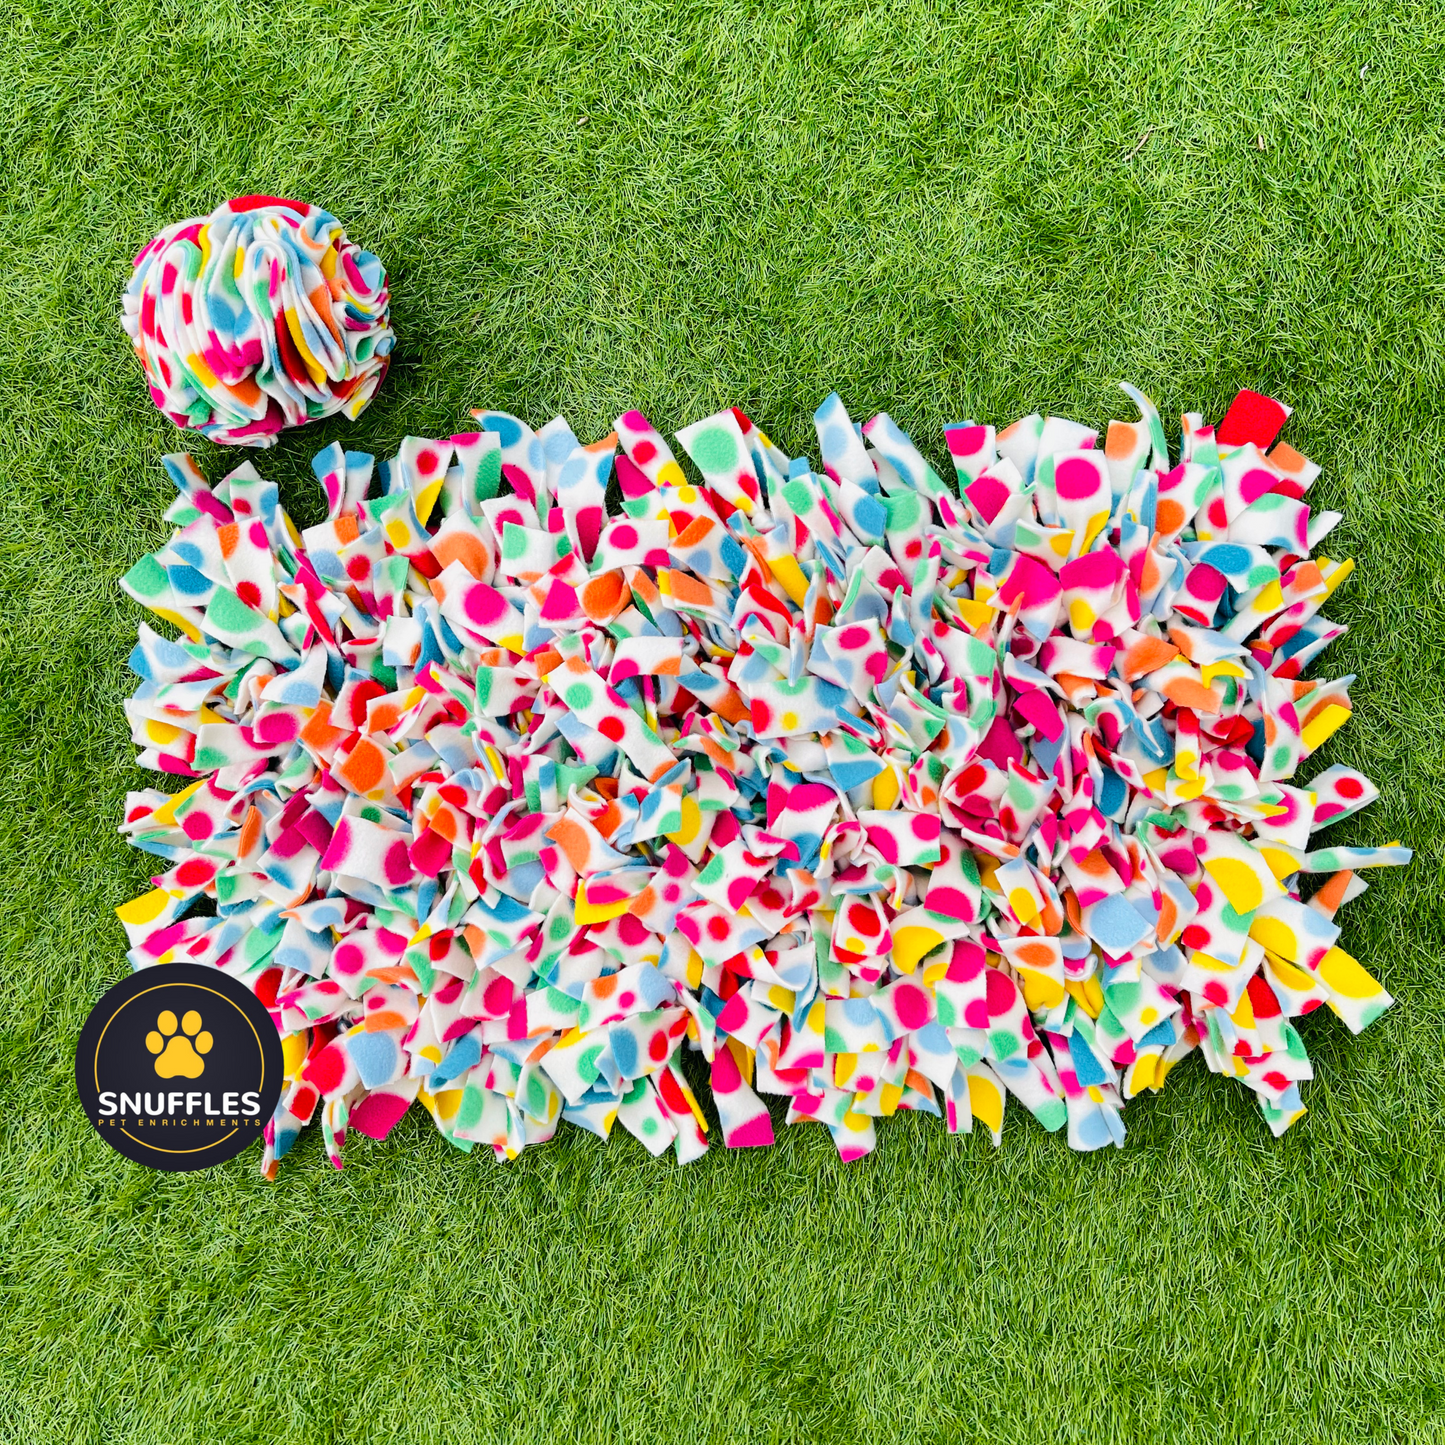 Large Snuffle Mat And Medium Snuffle Ball Set For Dogs, Available In 10 Colour Options